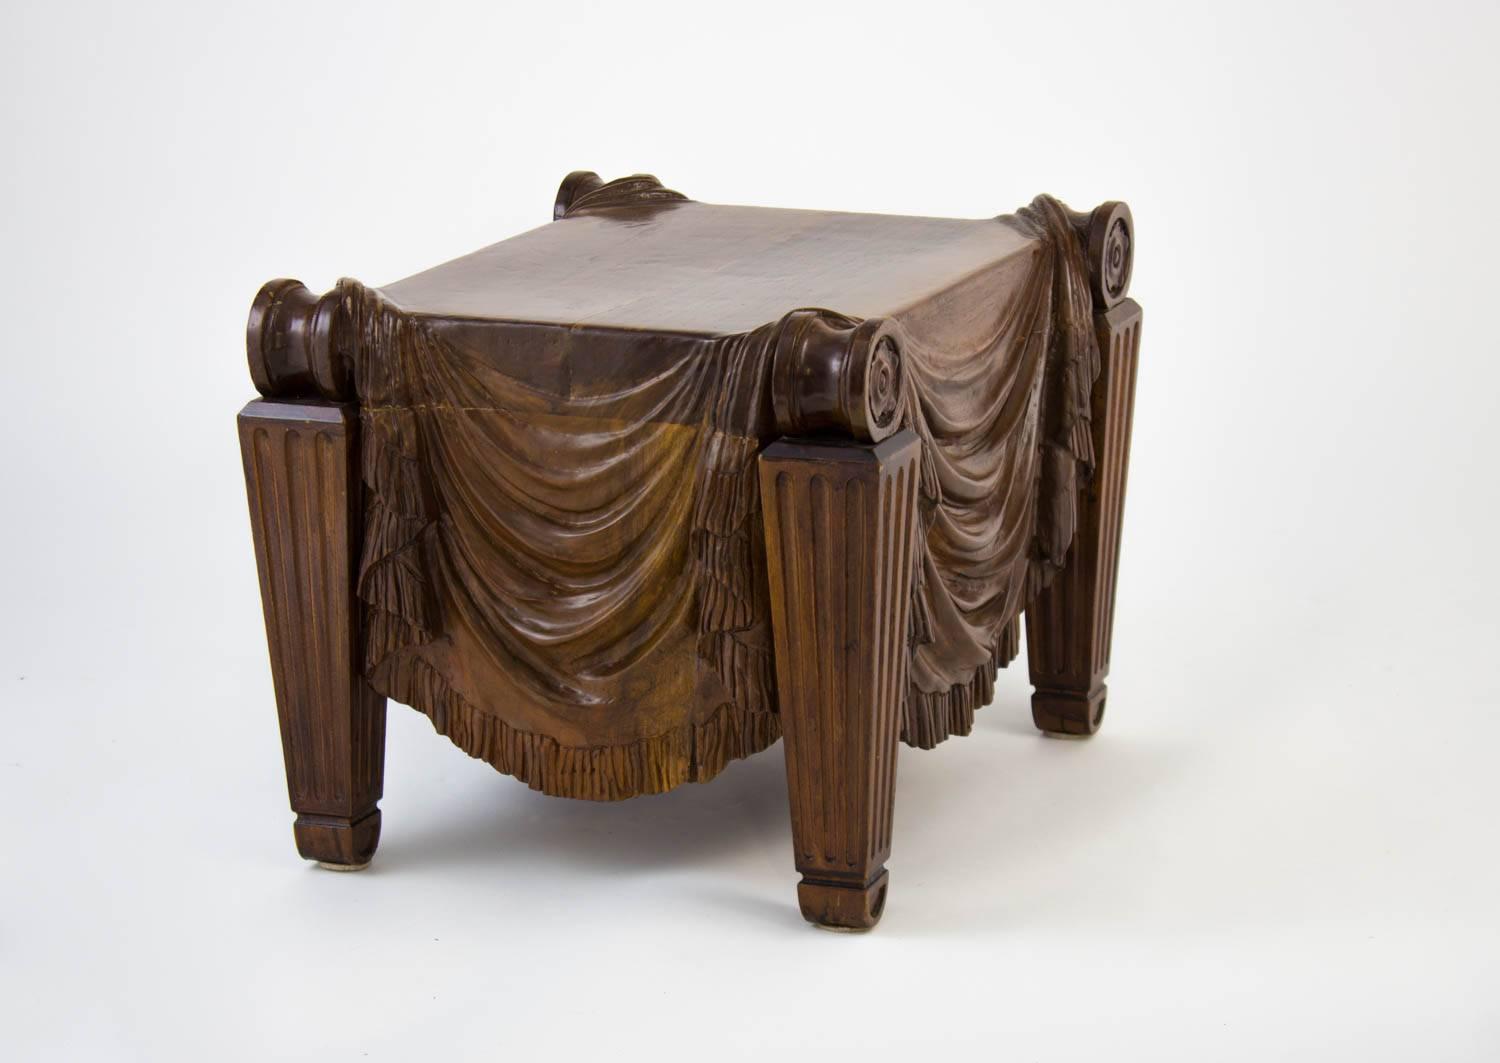 An intricately carved drapery swaging to scrolls on each edge over fluted, tapered legs. Solid wood, an original prototype hand-carved by a local woodworker. This design was produced in more production later by Ralph Lauren. 